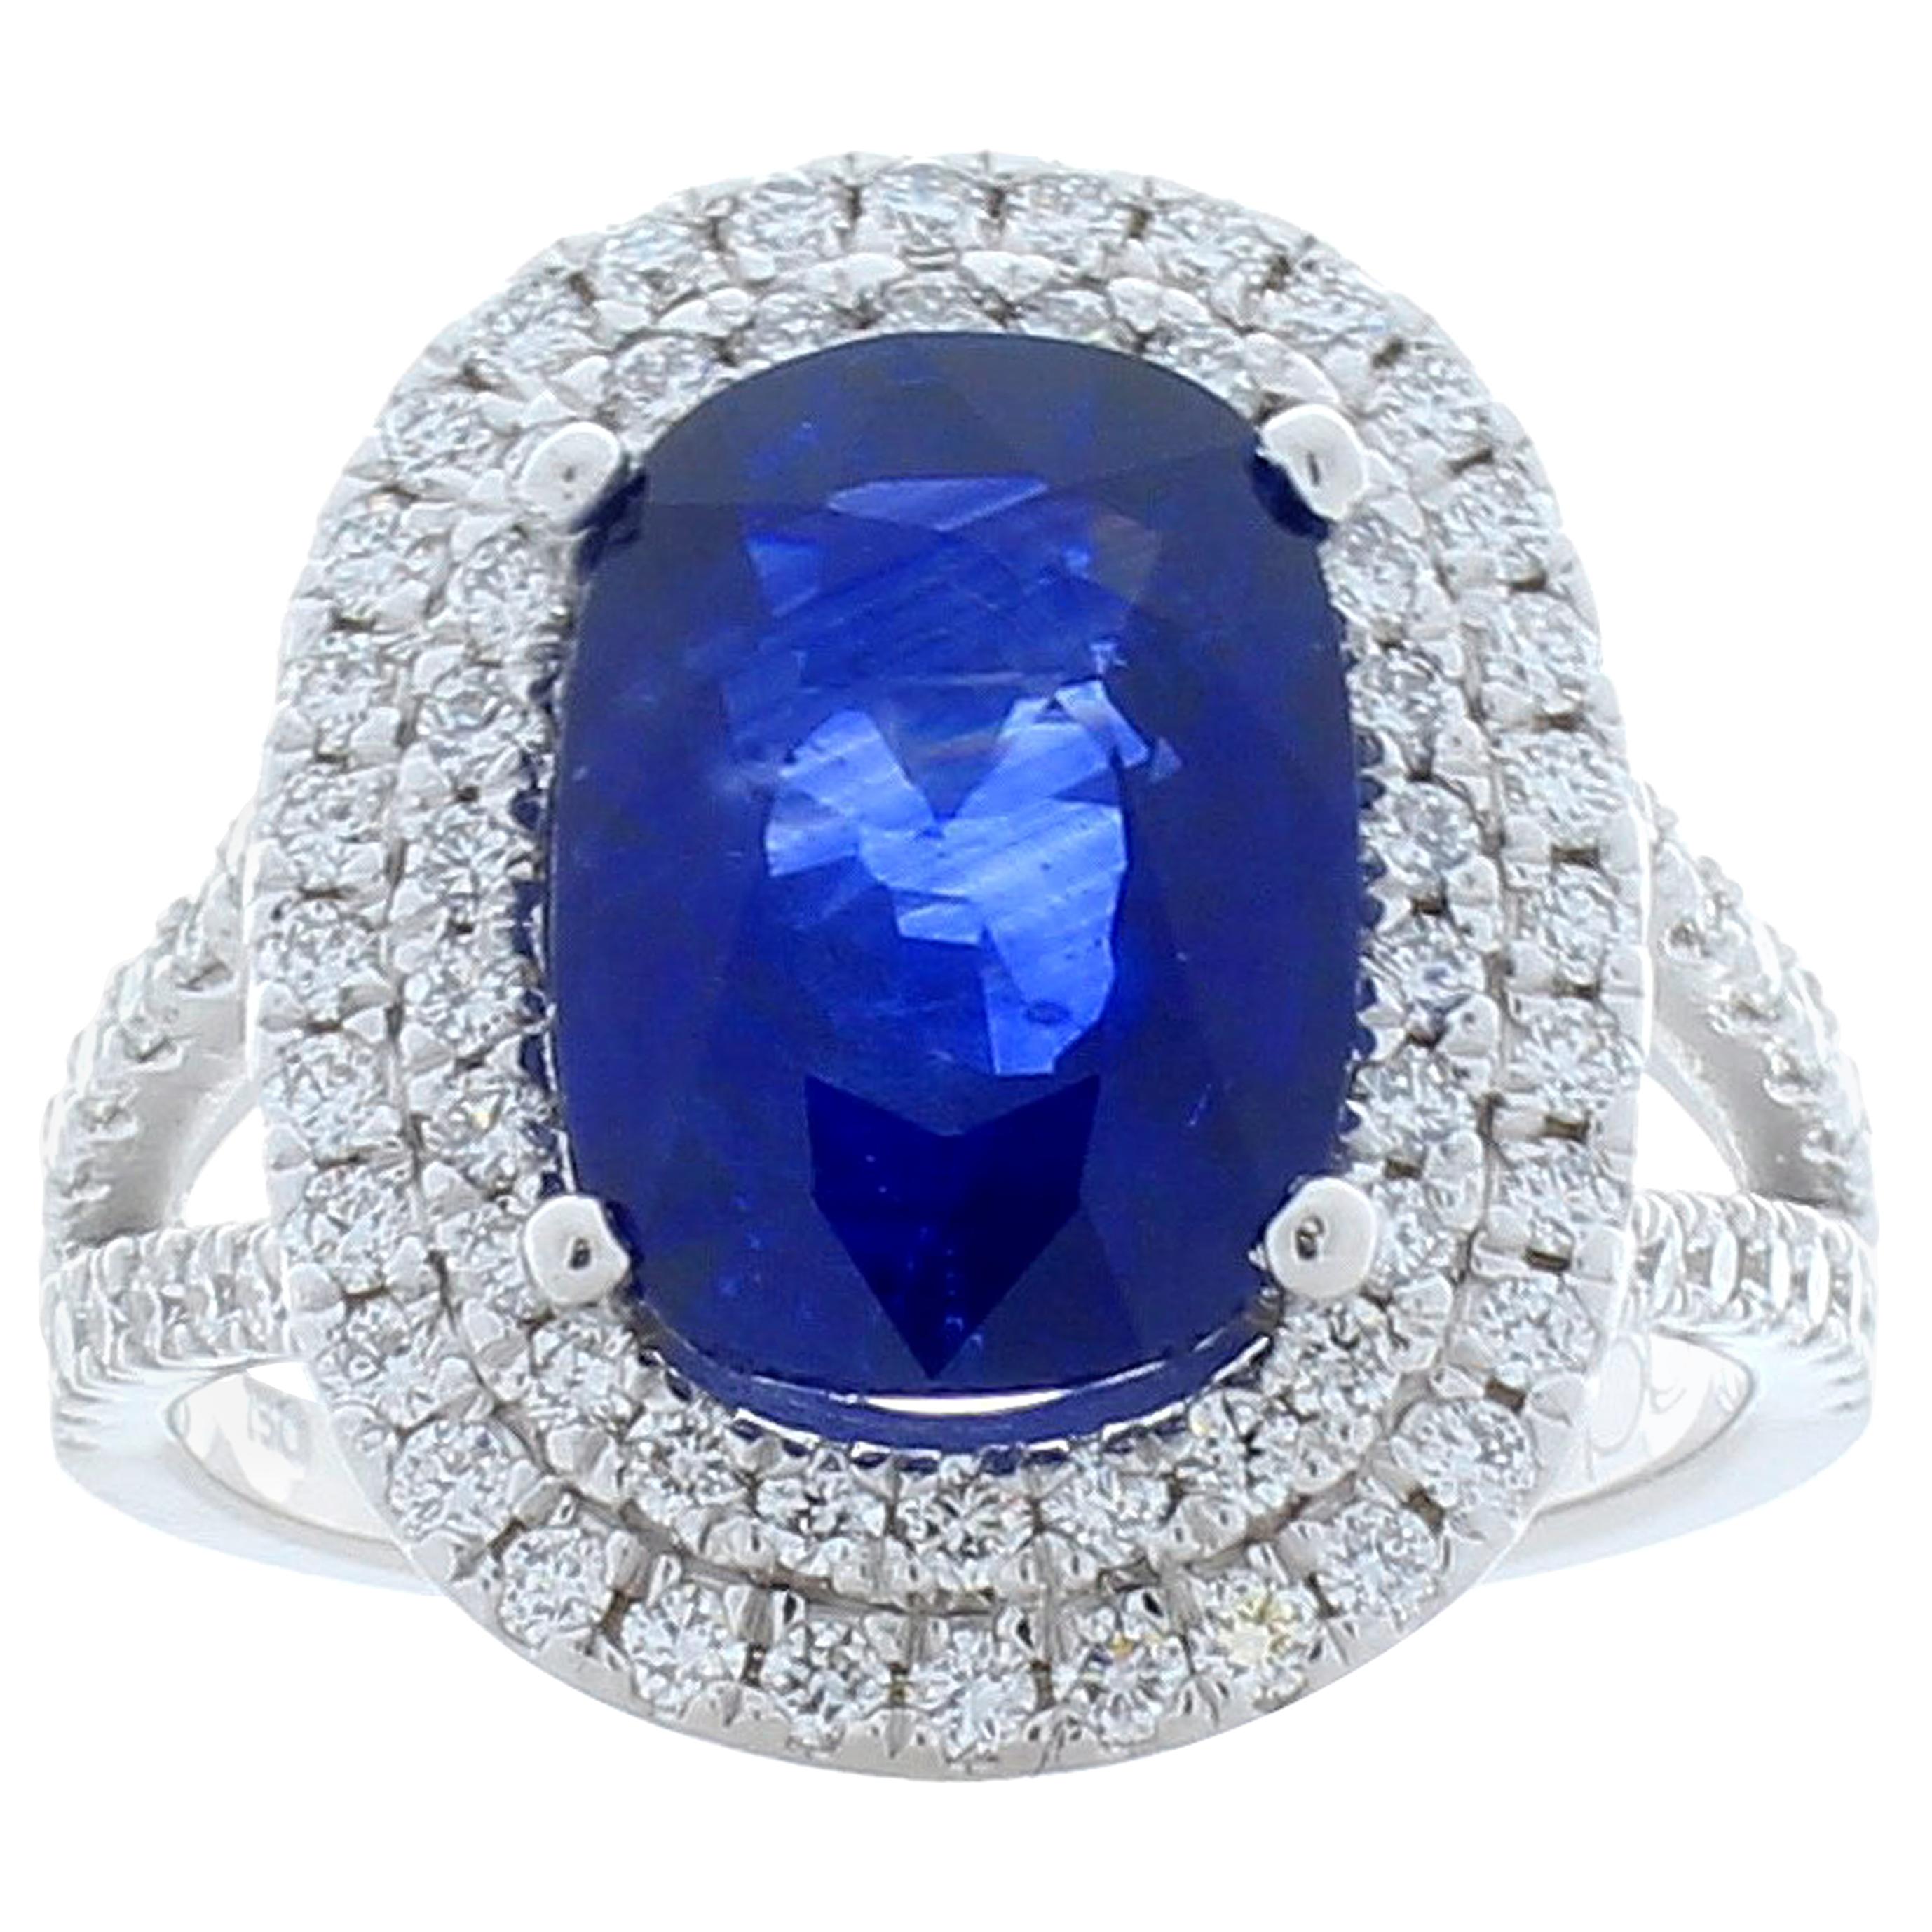 GIA Certified 4.49 Carat Cushion Cut Blue Sapphire and Diamond Cocktail Ring